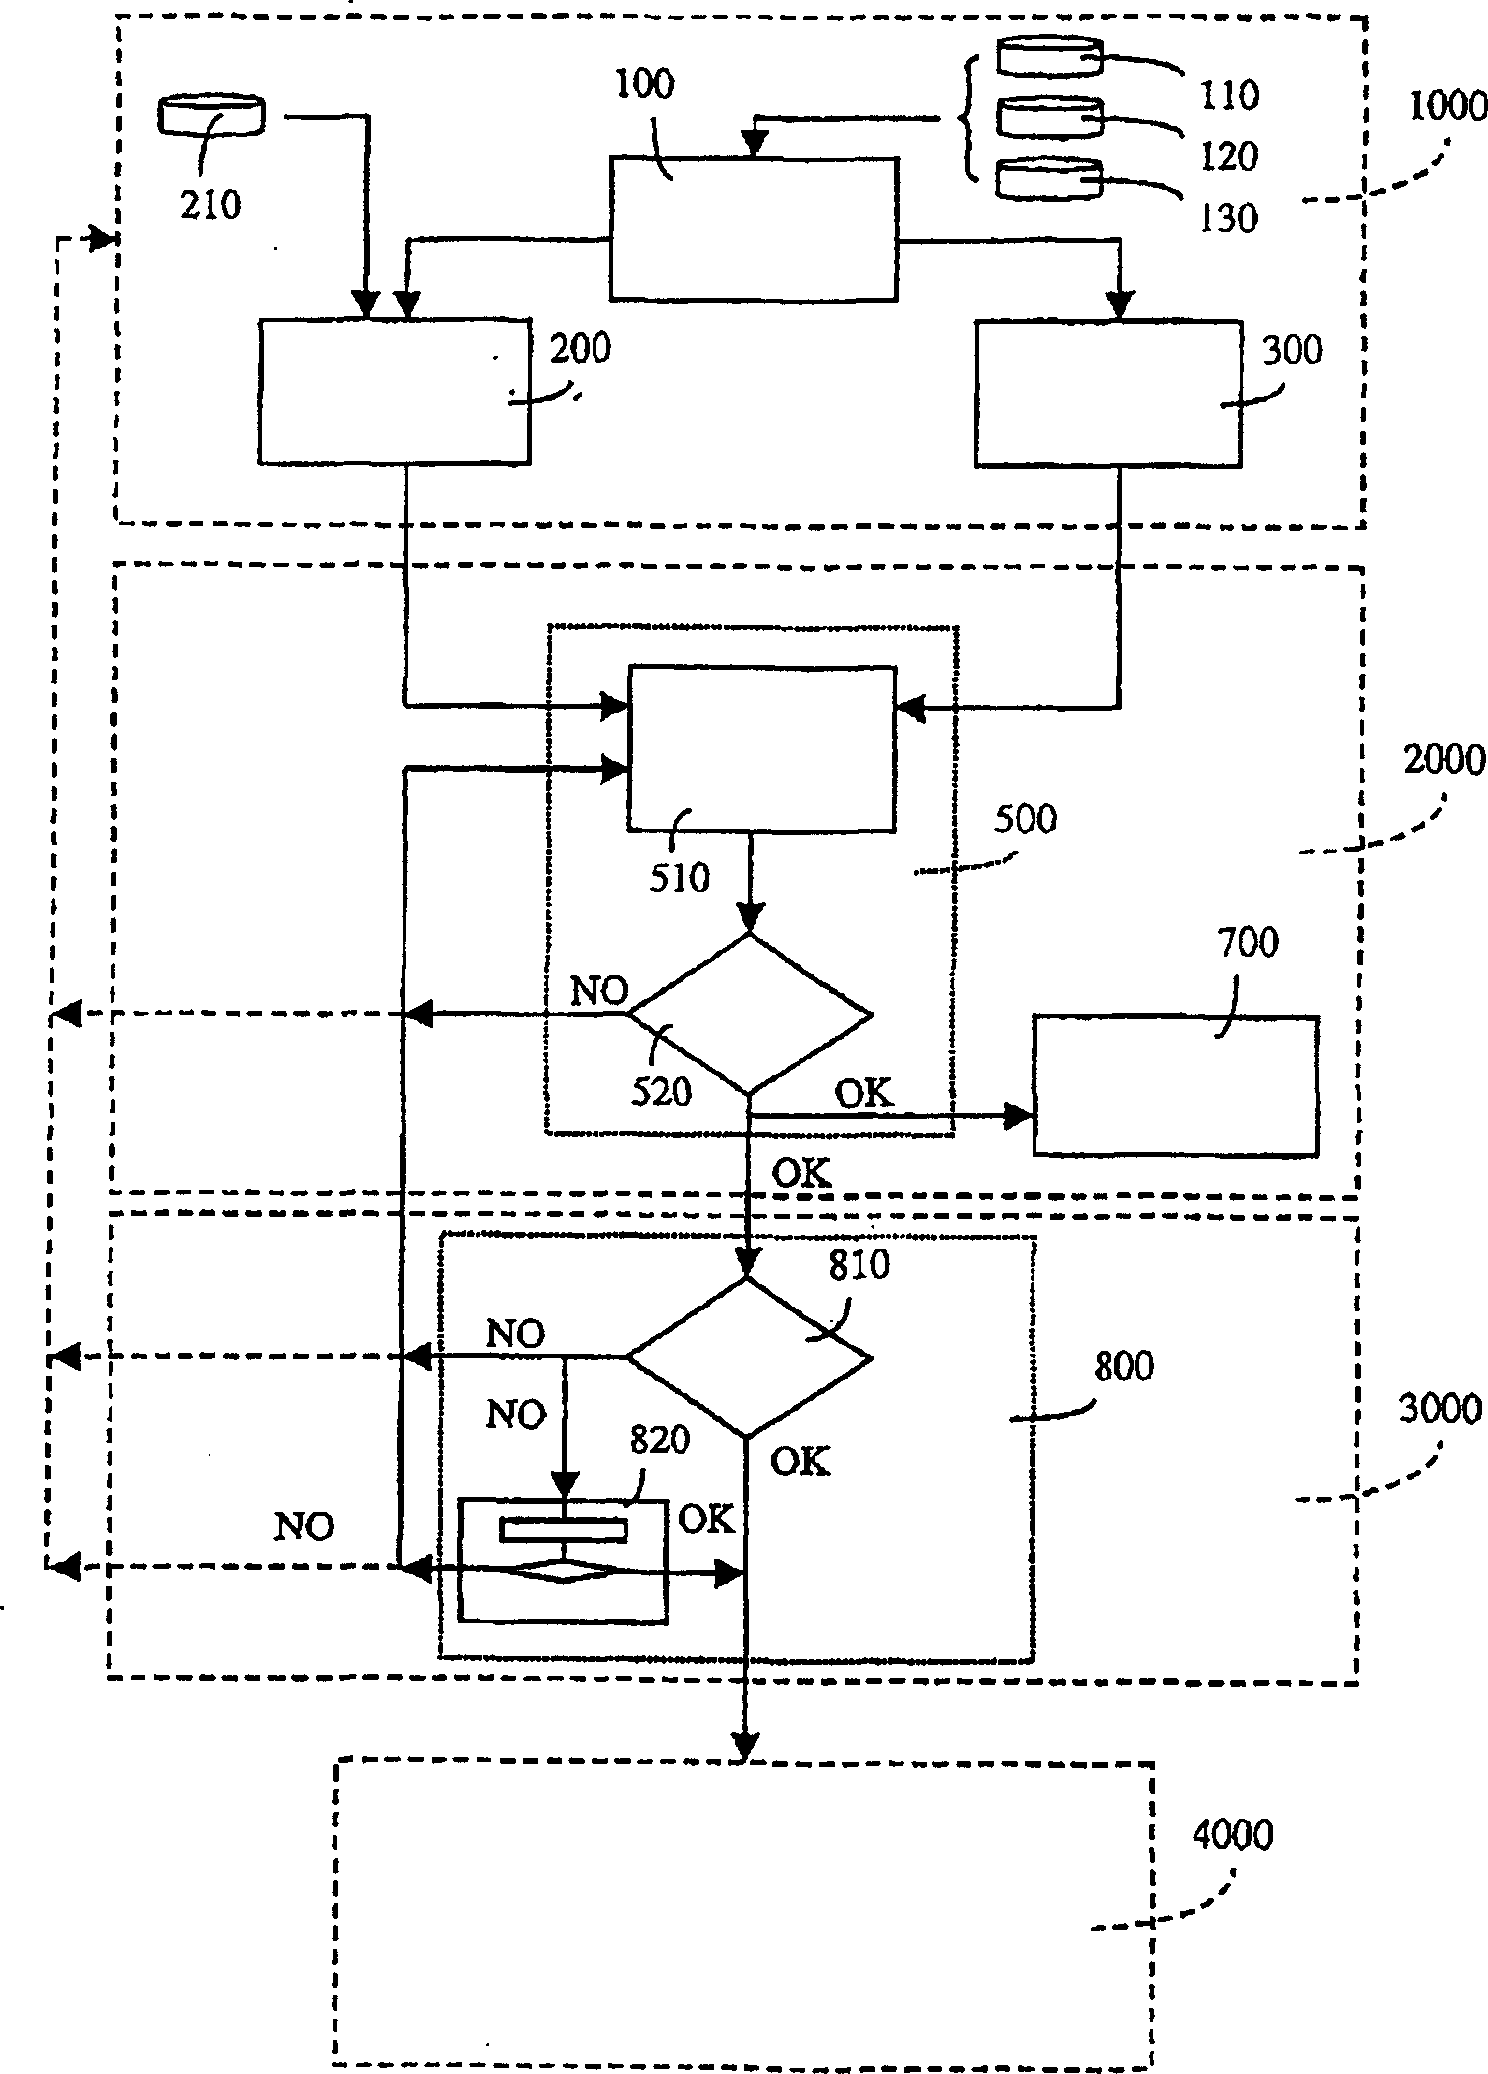 System and method for planning telecommunications network for mobile terminals